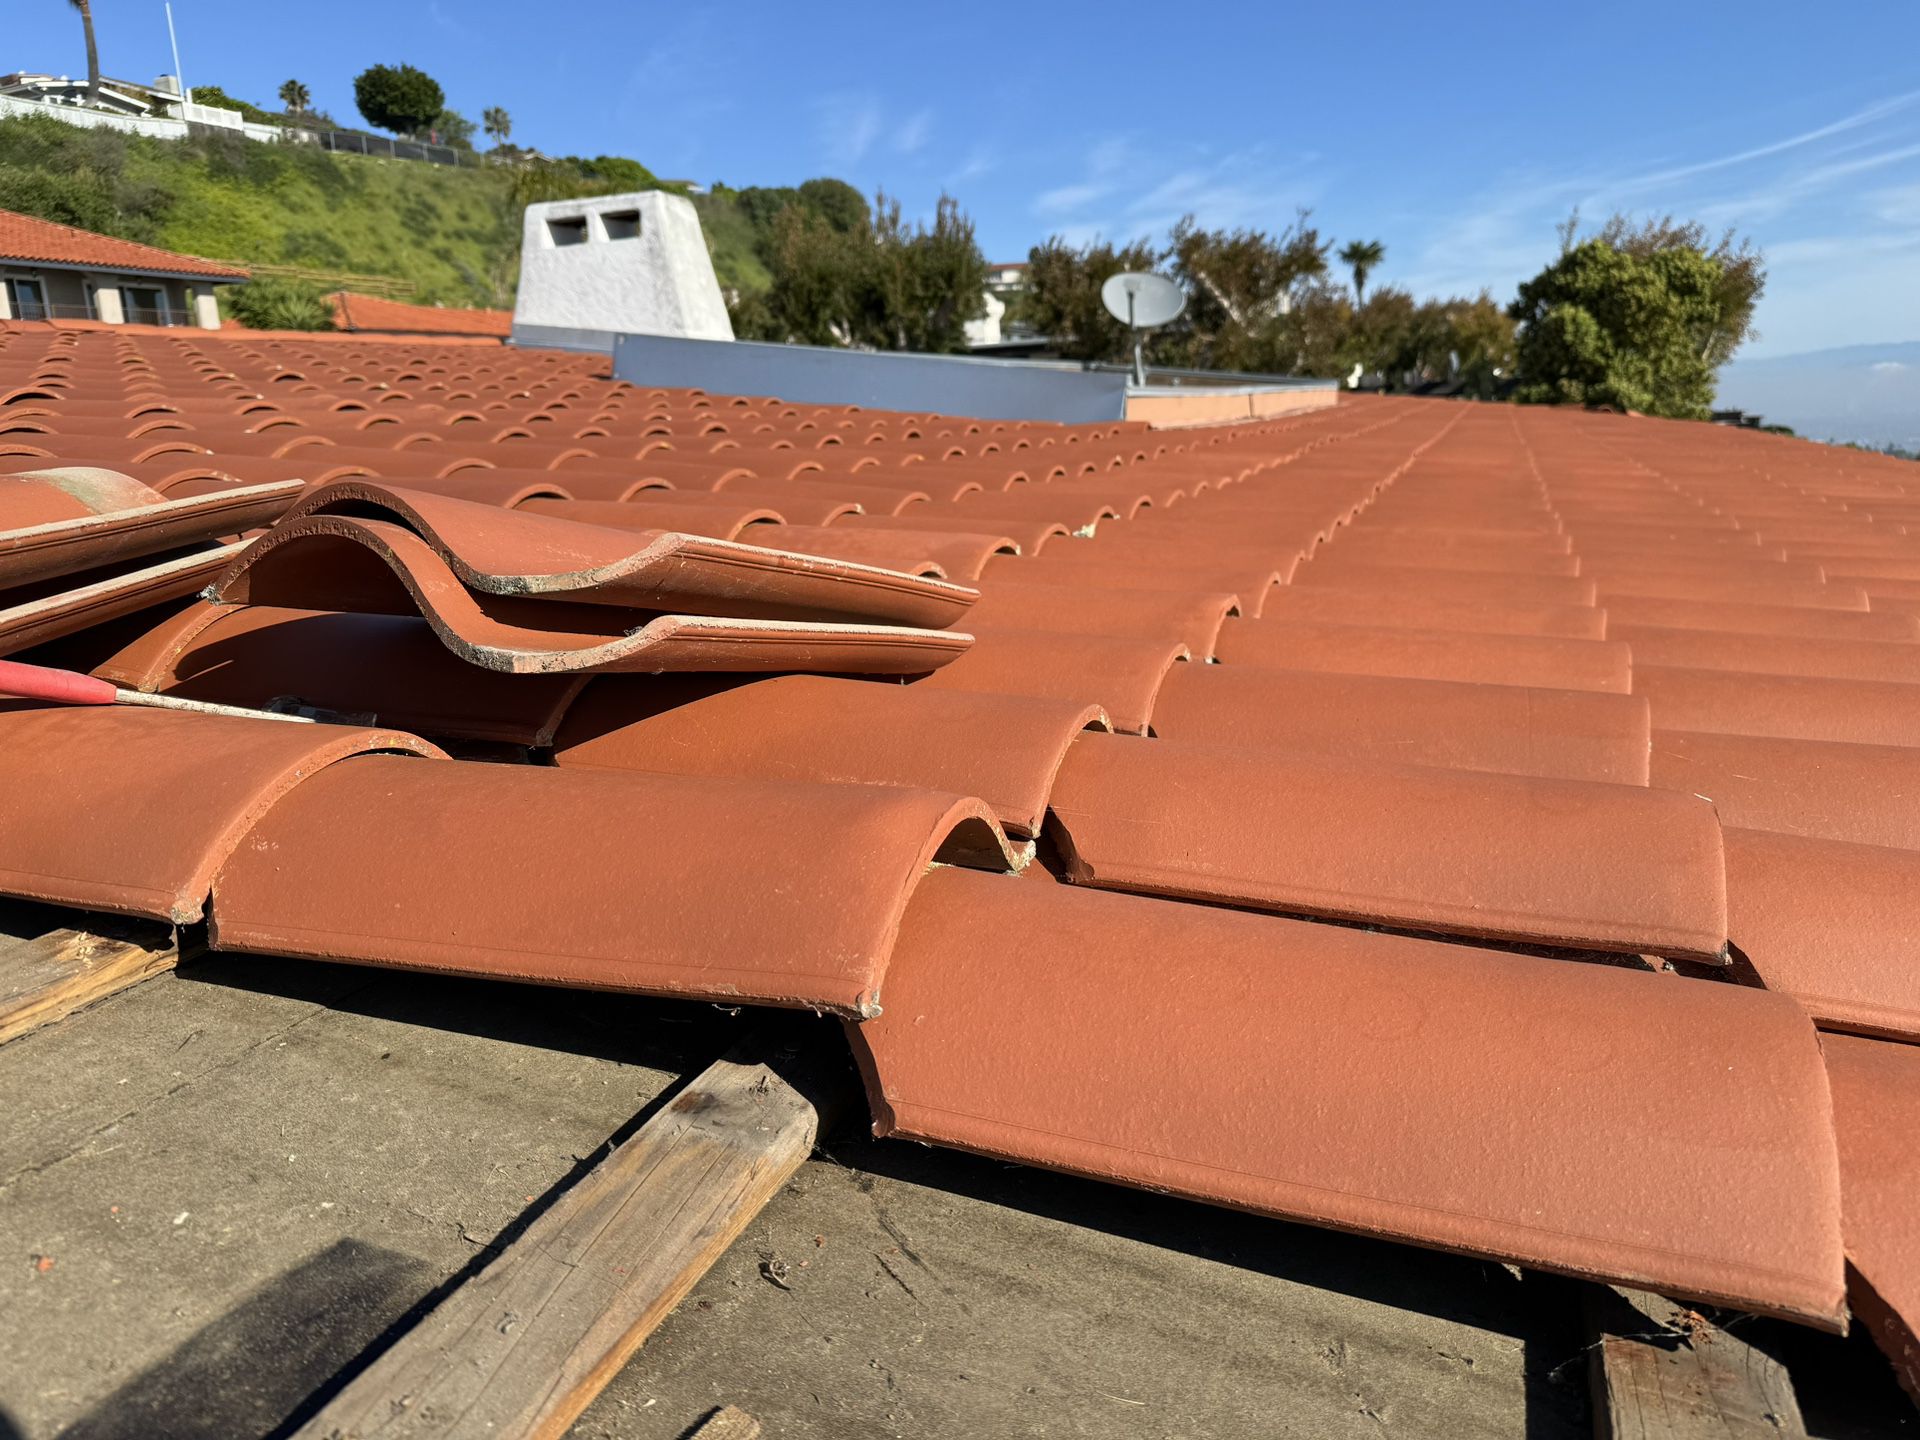 Roofing Tiles For Sale